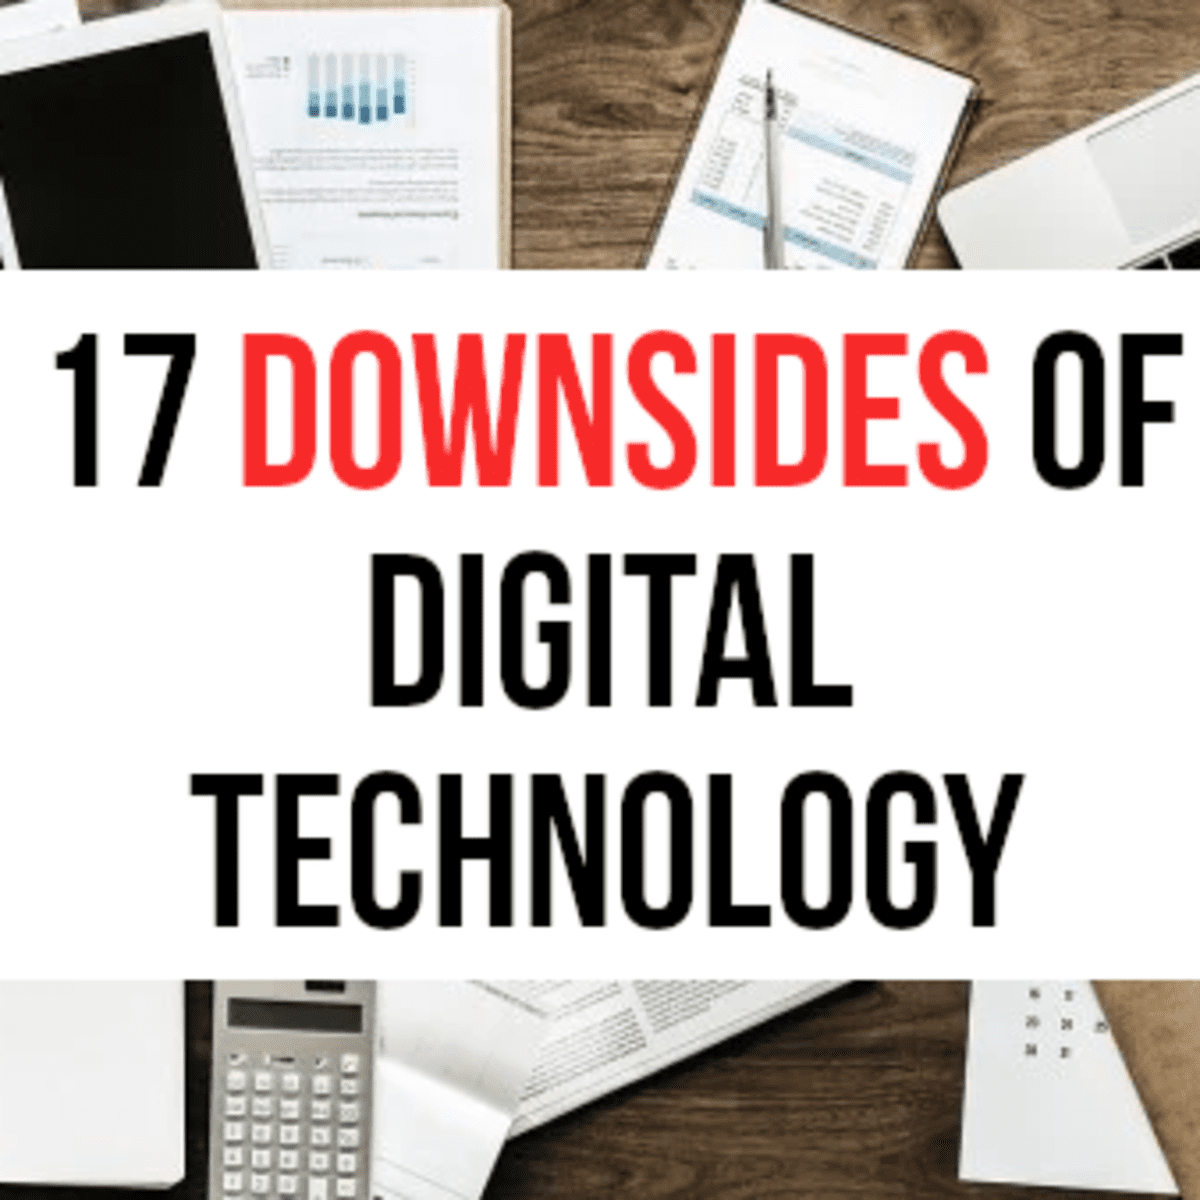 advantages and disadvantages of technology in society